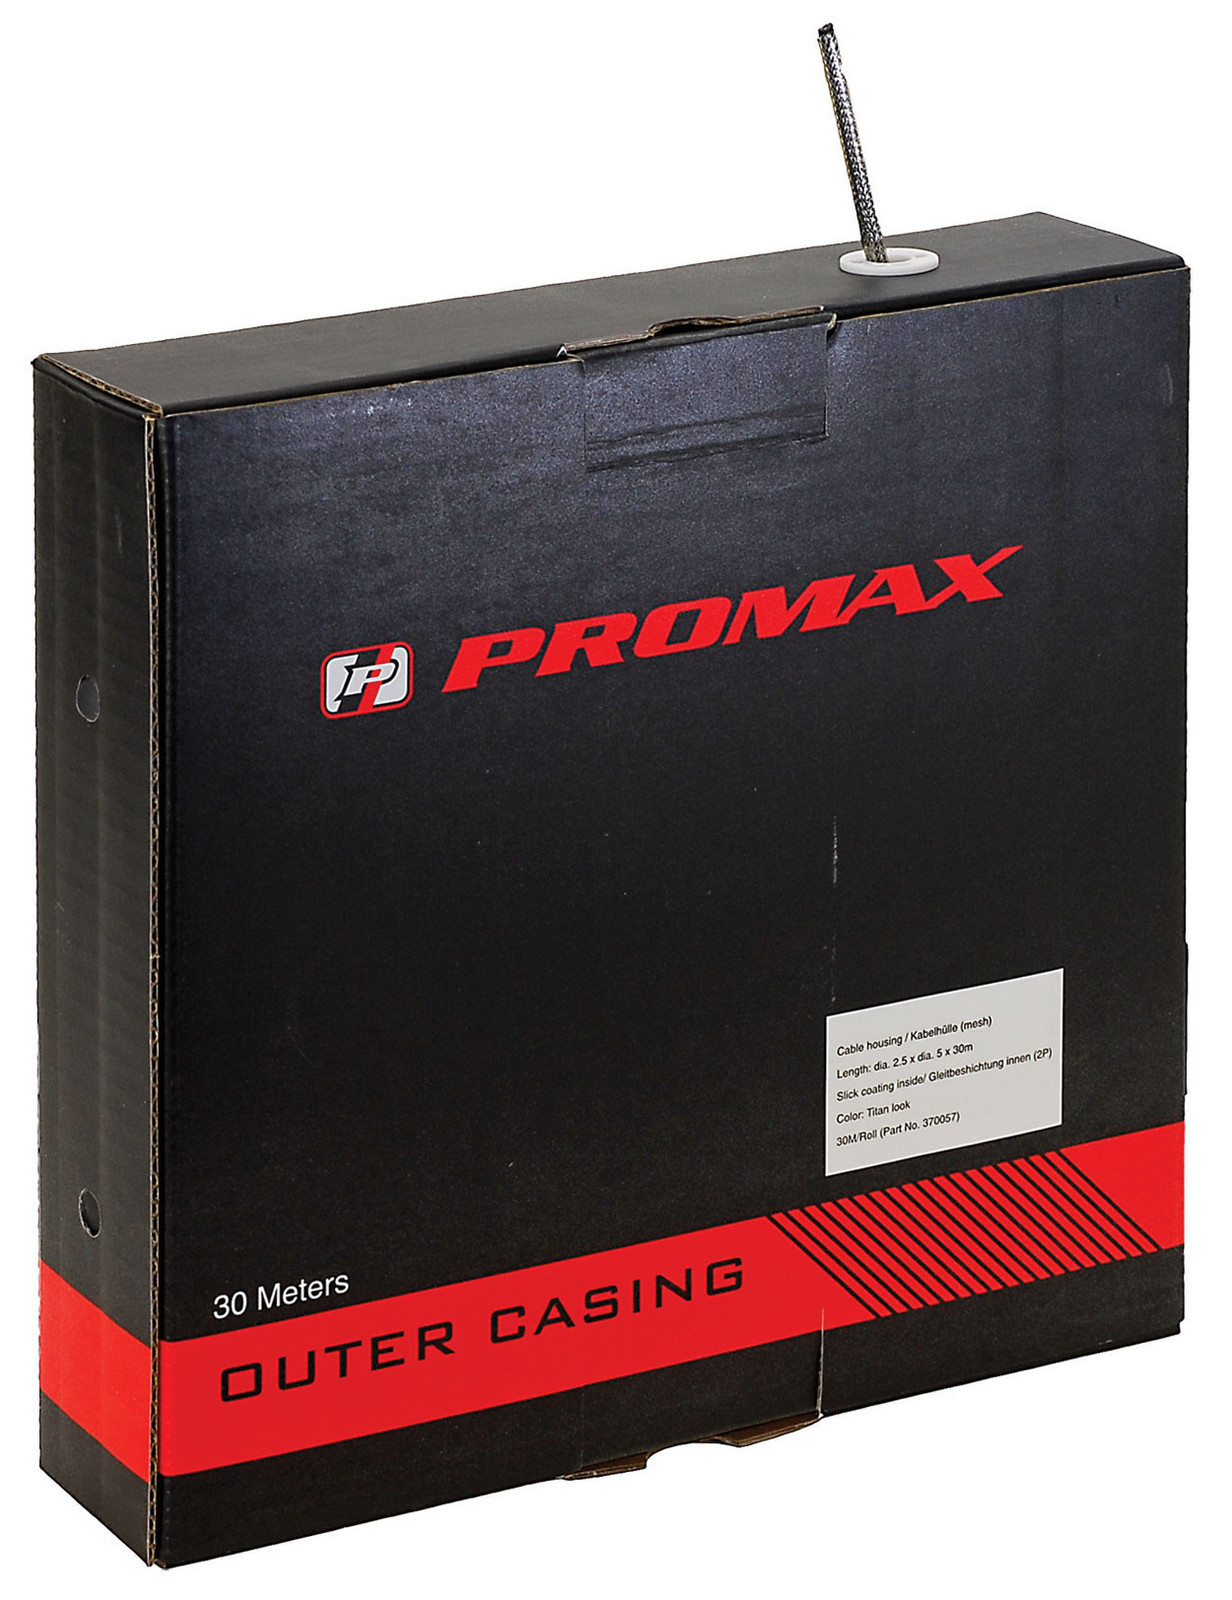  Promax Outer Casing For Brake Cables 2P Teflon For 1.6-2.0MM Brake 30M Roll In Display Box.  Promax Outer Casing For Brake Cables 2P Teflon For 1.6-2.0MM Brake 30M Roll In Display Box.